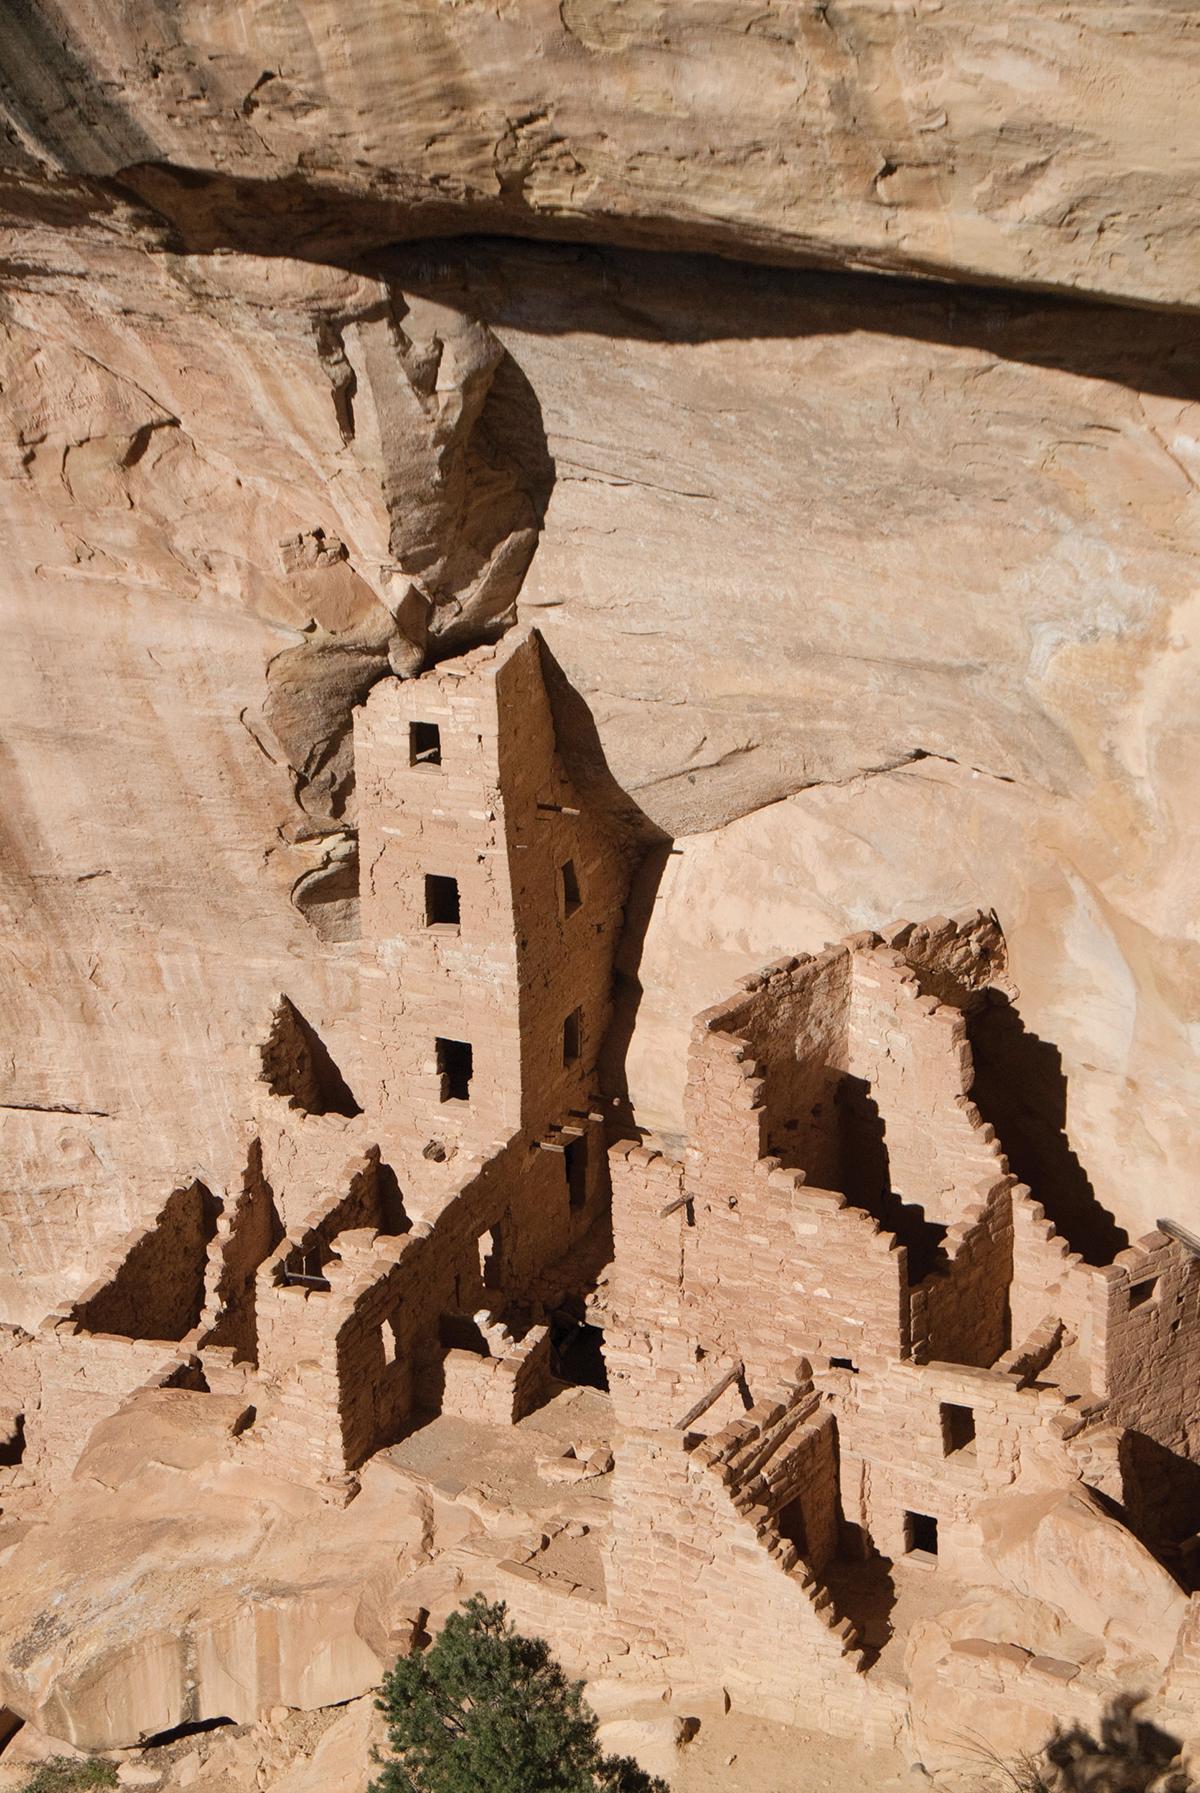 Cliff dwellings at Mesa Verde, carved into tan sandstone